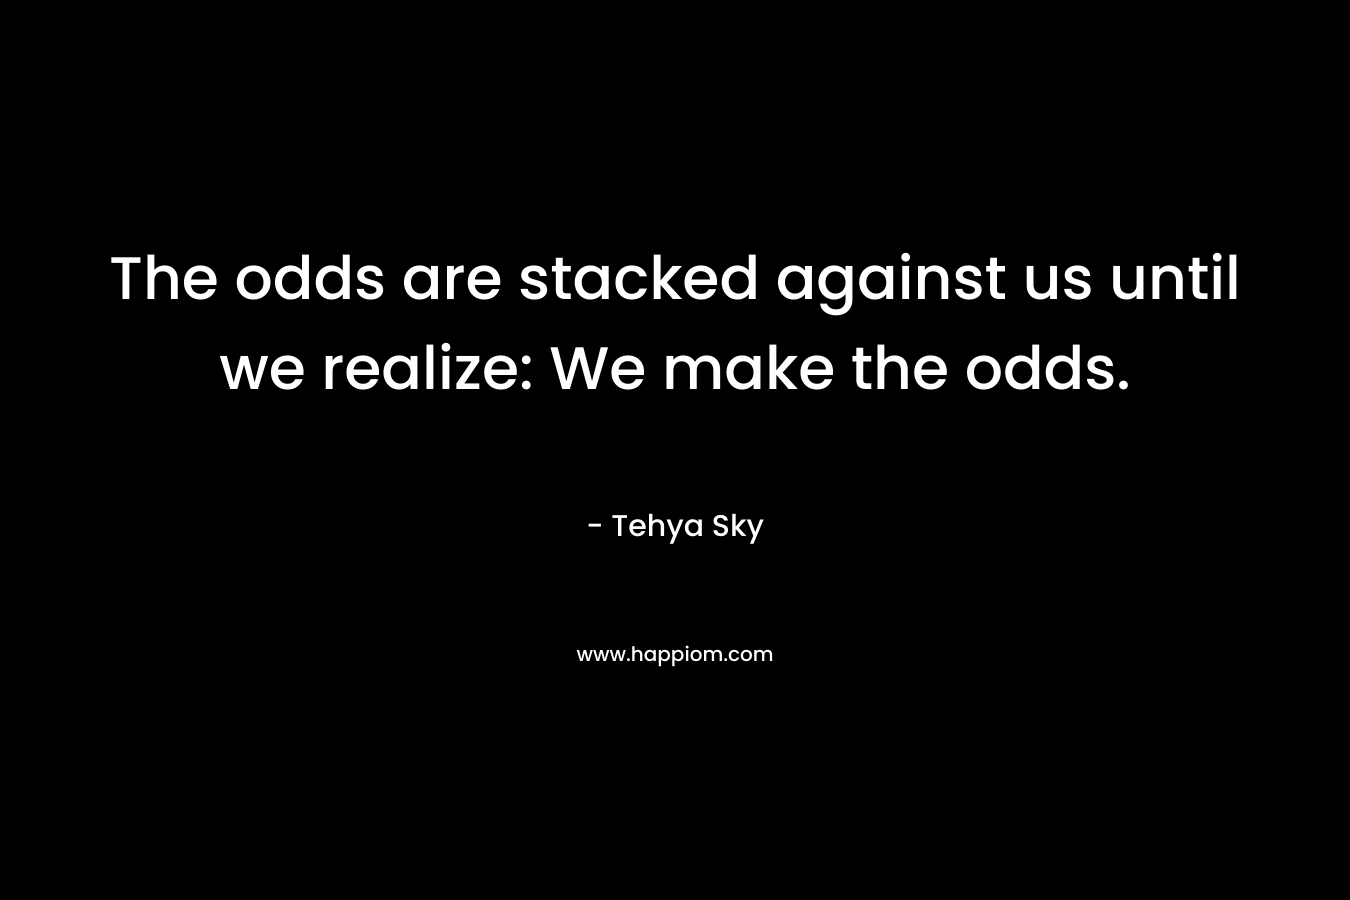 The odds are stacked against us until we realize: We make the odds. – Tehya Sky